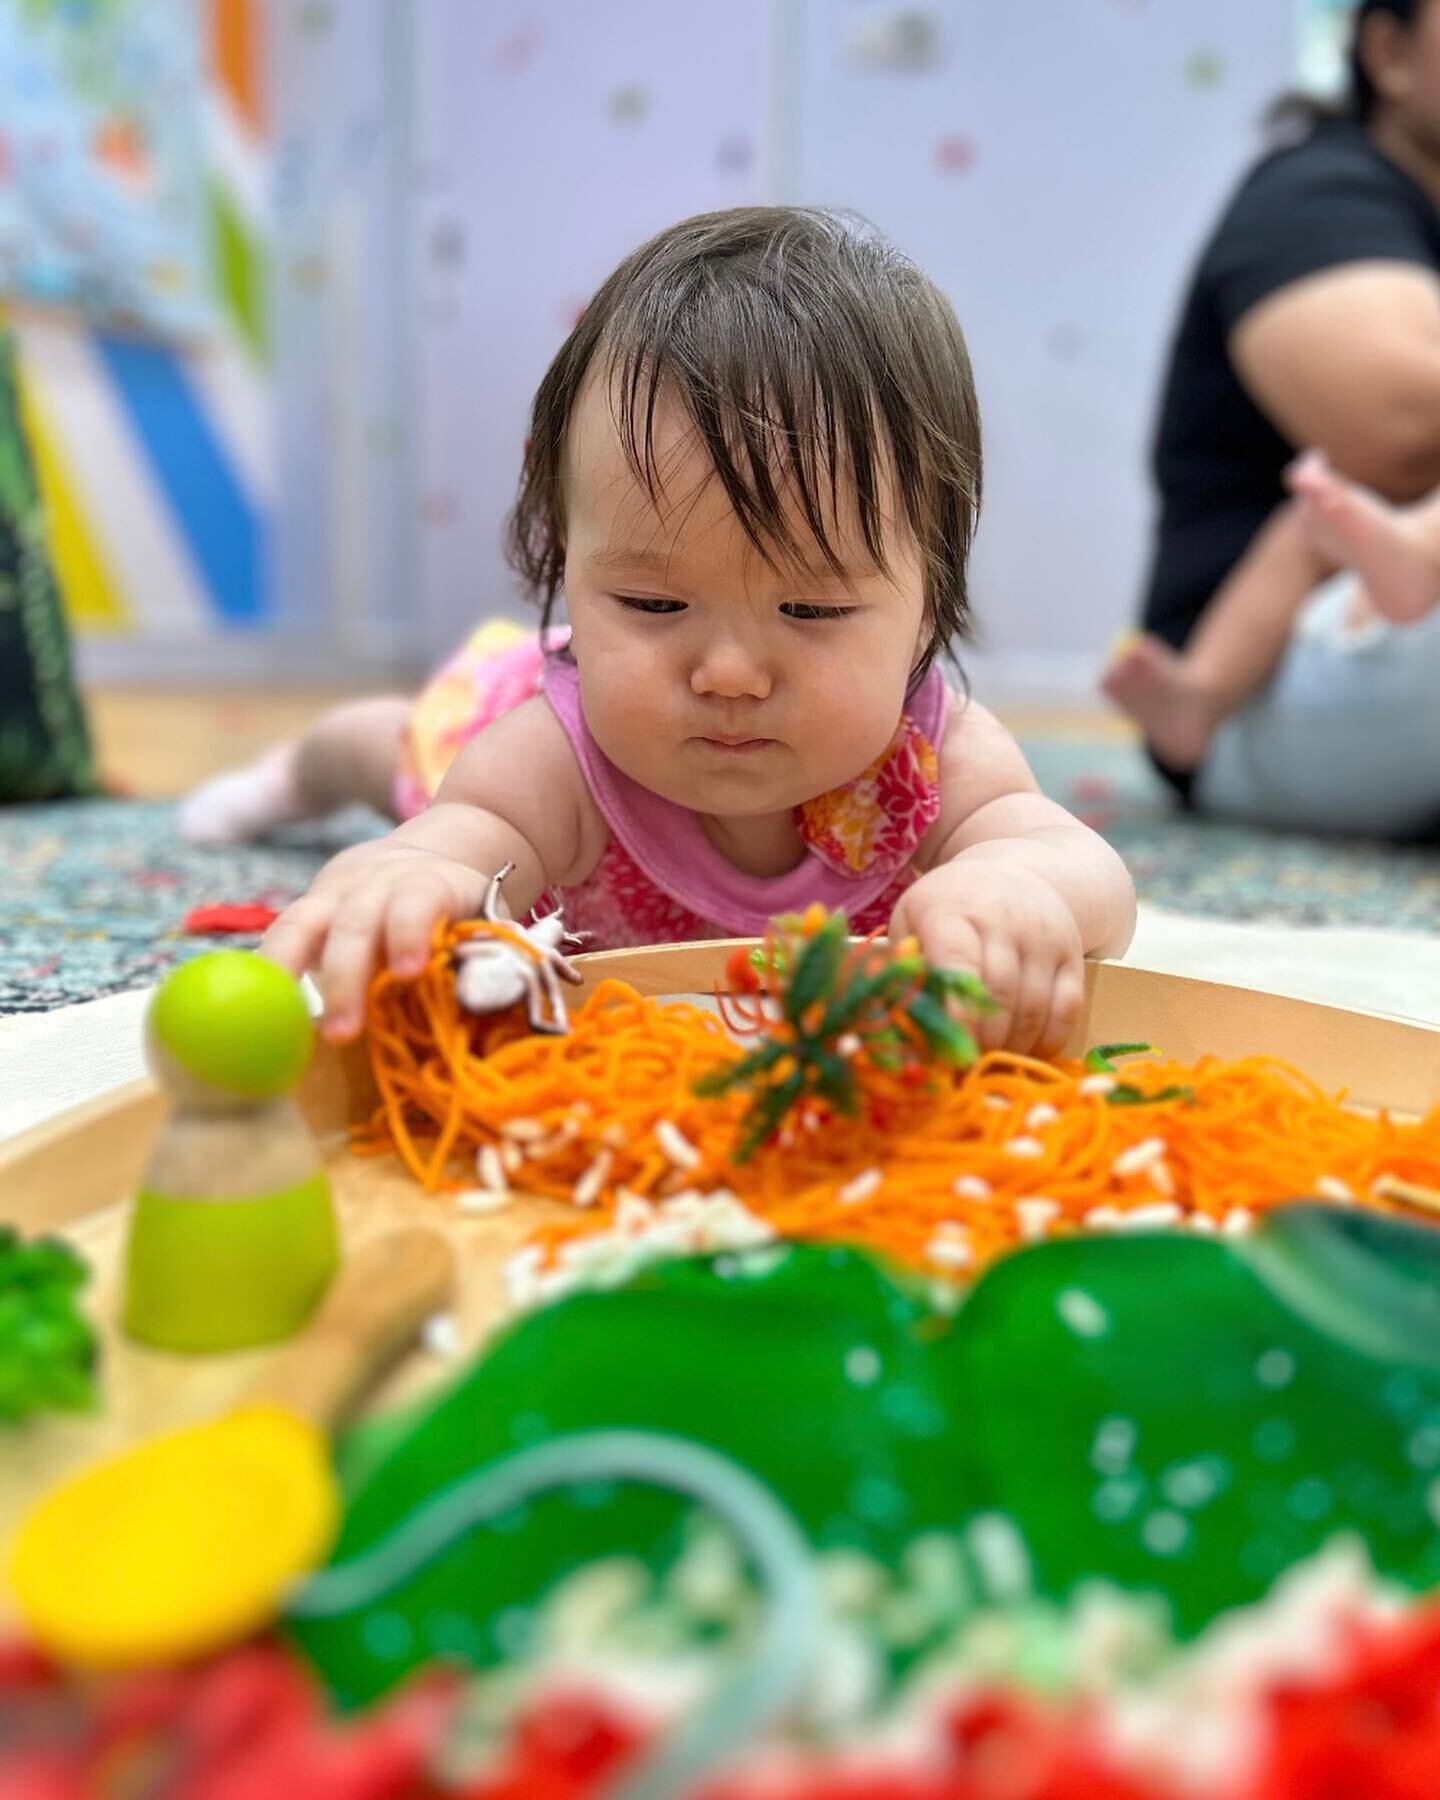 Unlock your little one&rsquo;s potential through sensory play!

Join our 40-minute instructor led sessions for babies and toddlers, followed by 20 minutes of messy exploratory play, and give your child the opportunity to explore, learn, and have fun!